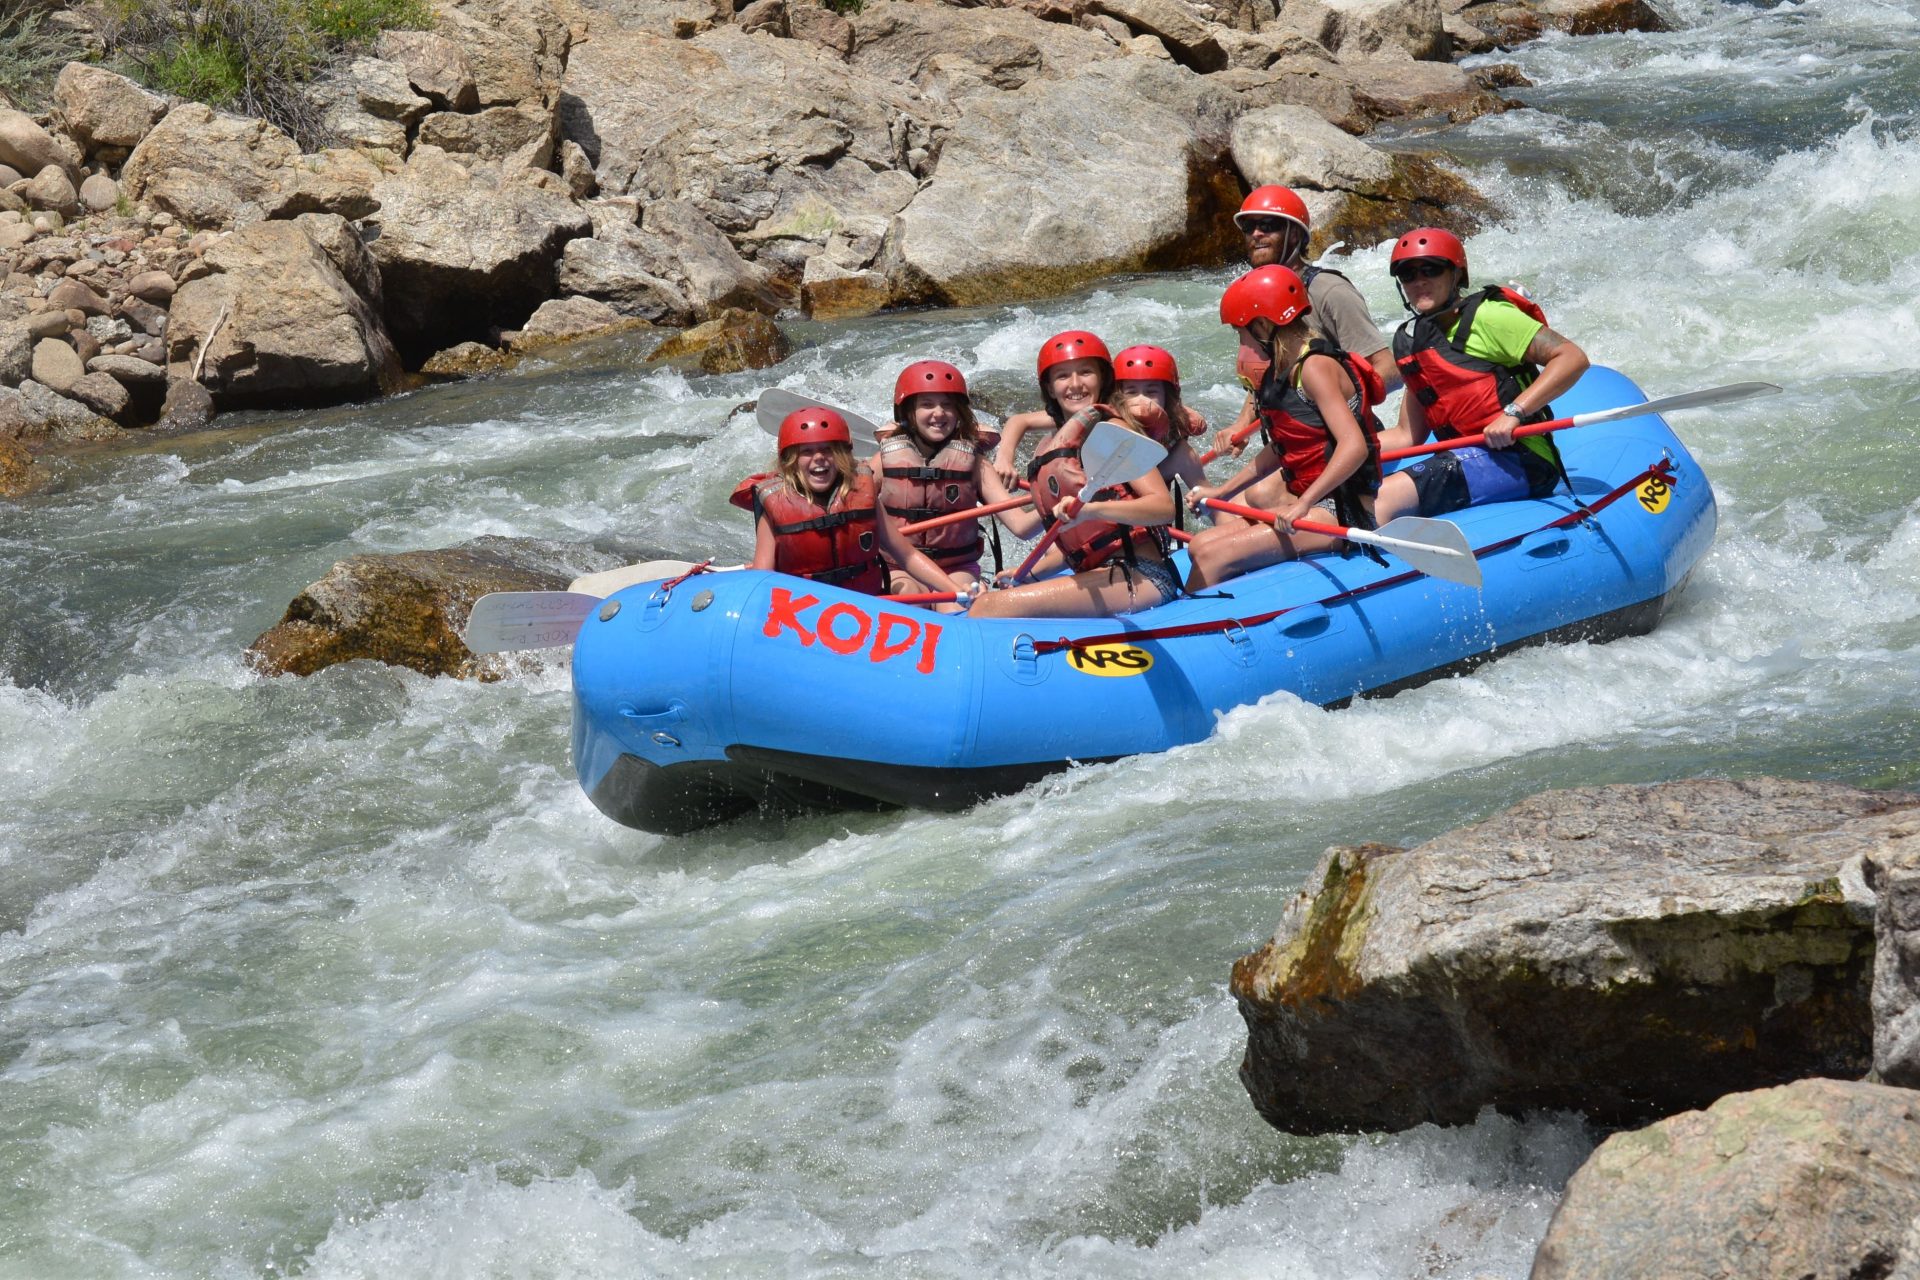 A tourist group engaged in a thrilling kayaking experience on the river